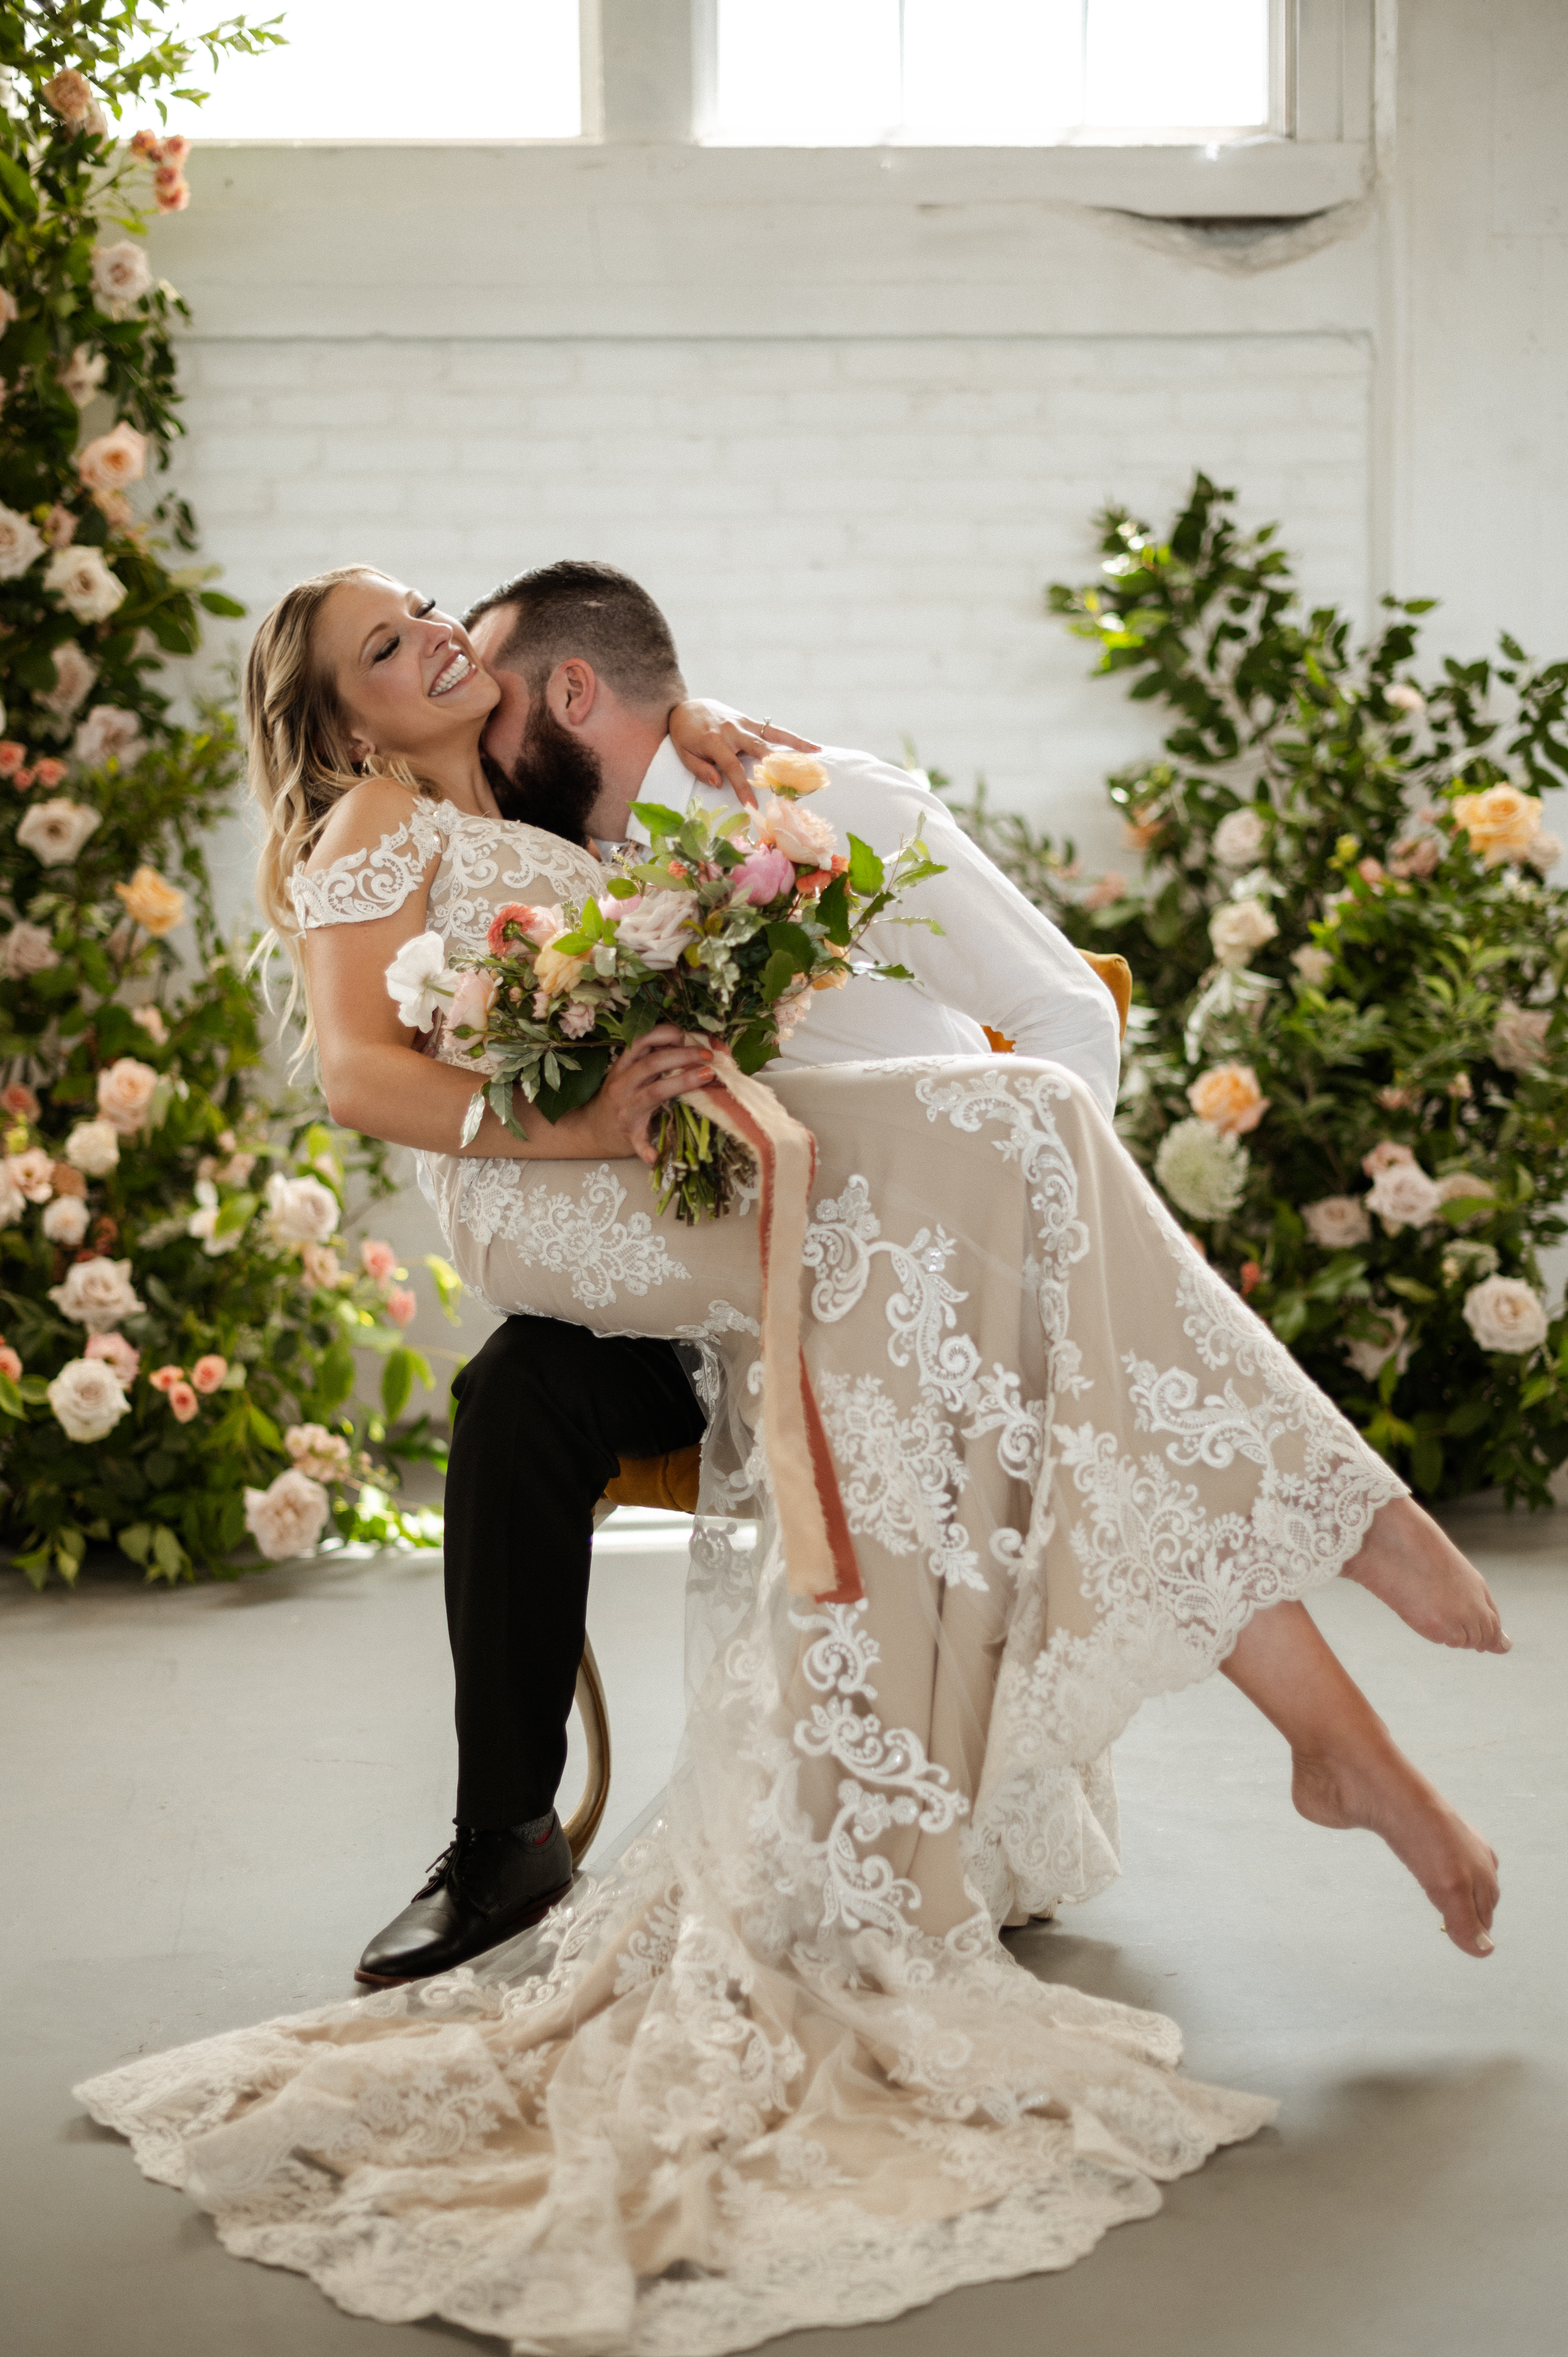 Boho Bride and groom infront of beautiful floral installation for Boho Styled Elopement